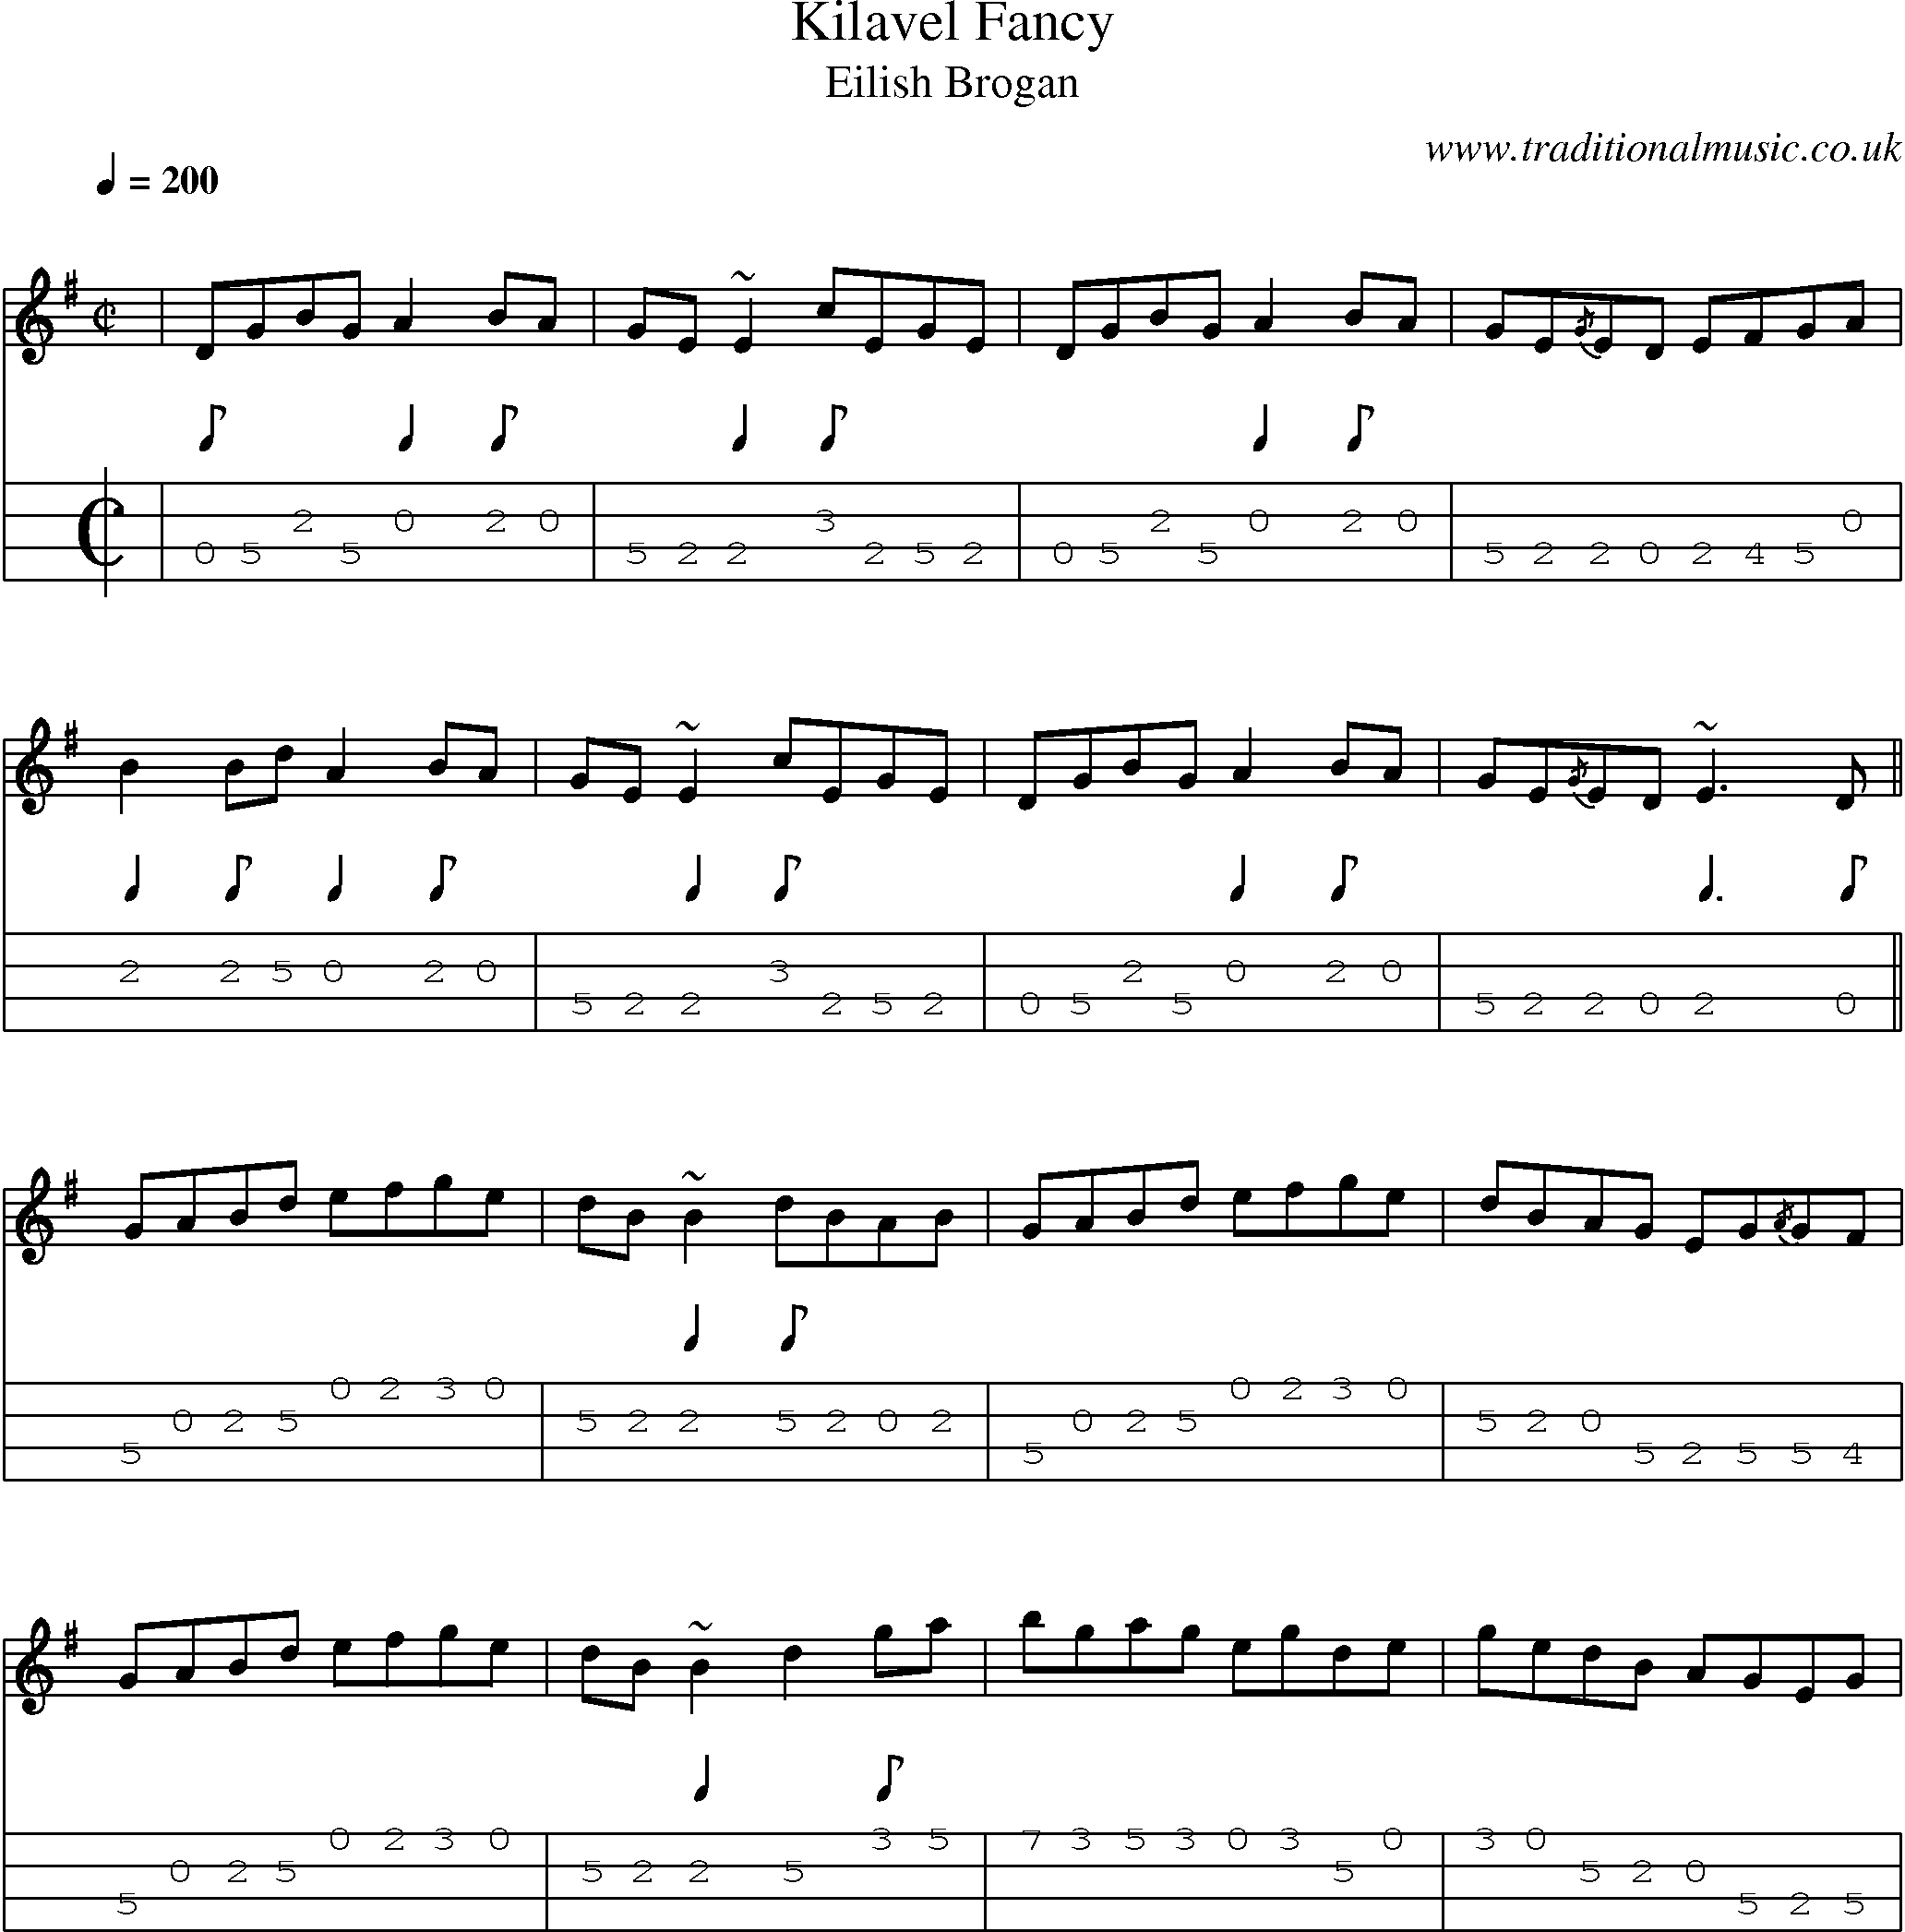 Music Score and Mandolin Tabs for Kilavel Fancy